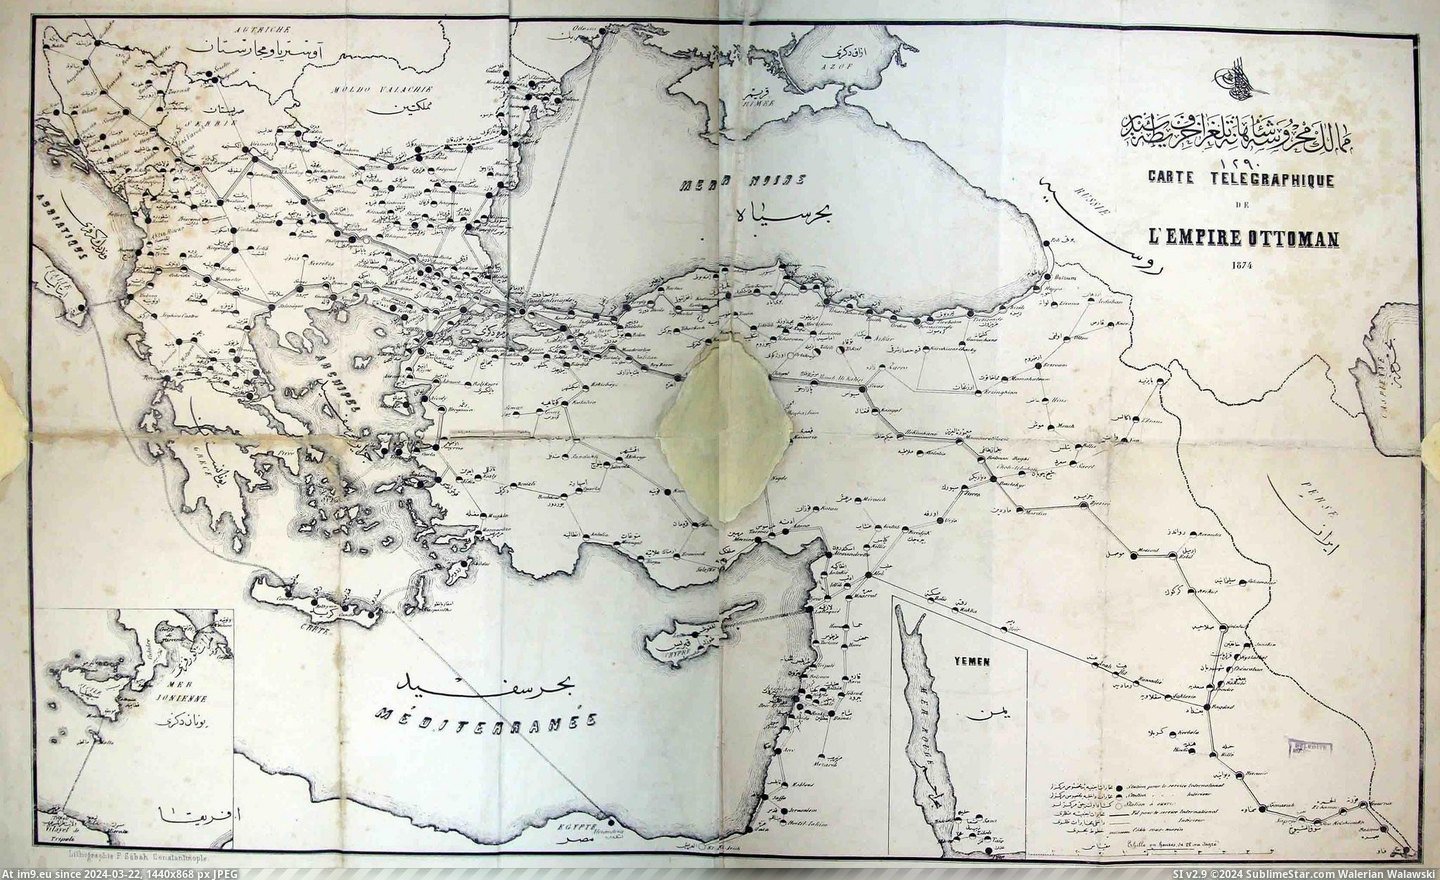 #Black #White #Show #Network #Ottoman #Stations #Dots #International #Empire #Solid [Mapporn] 1874 Ottoman Empire Telegram Network [2048x1247) Solid Black dots show international stations and black and white dots Pic. (Image of album My r/MAPS favs))